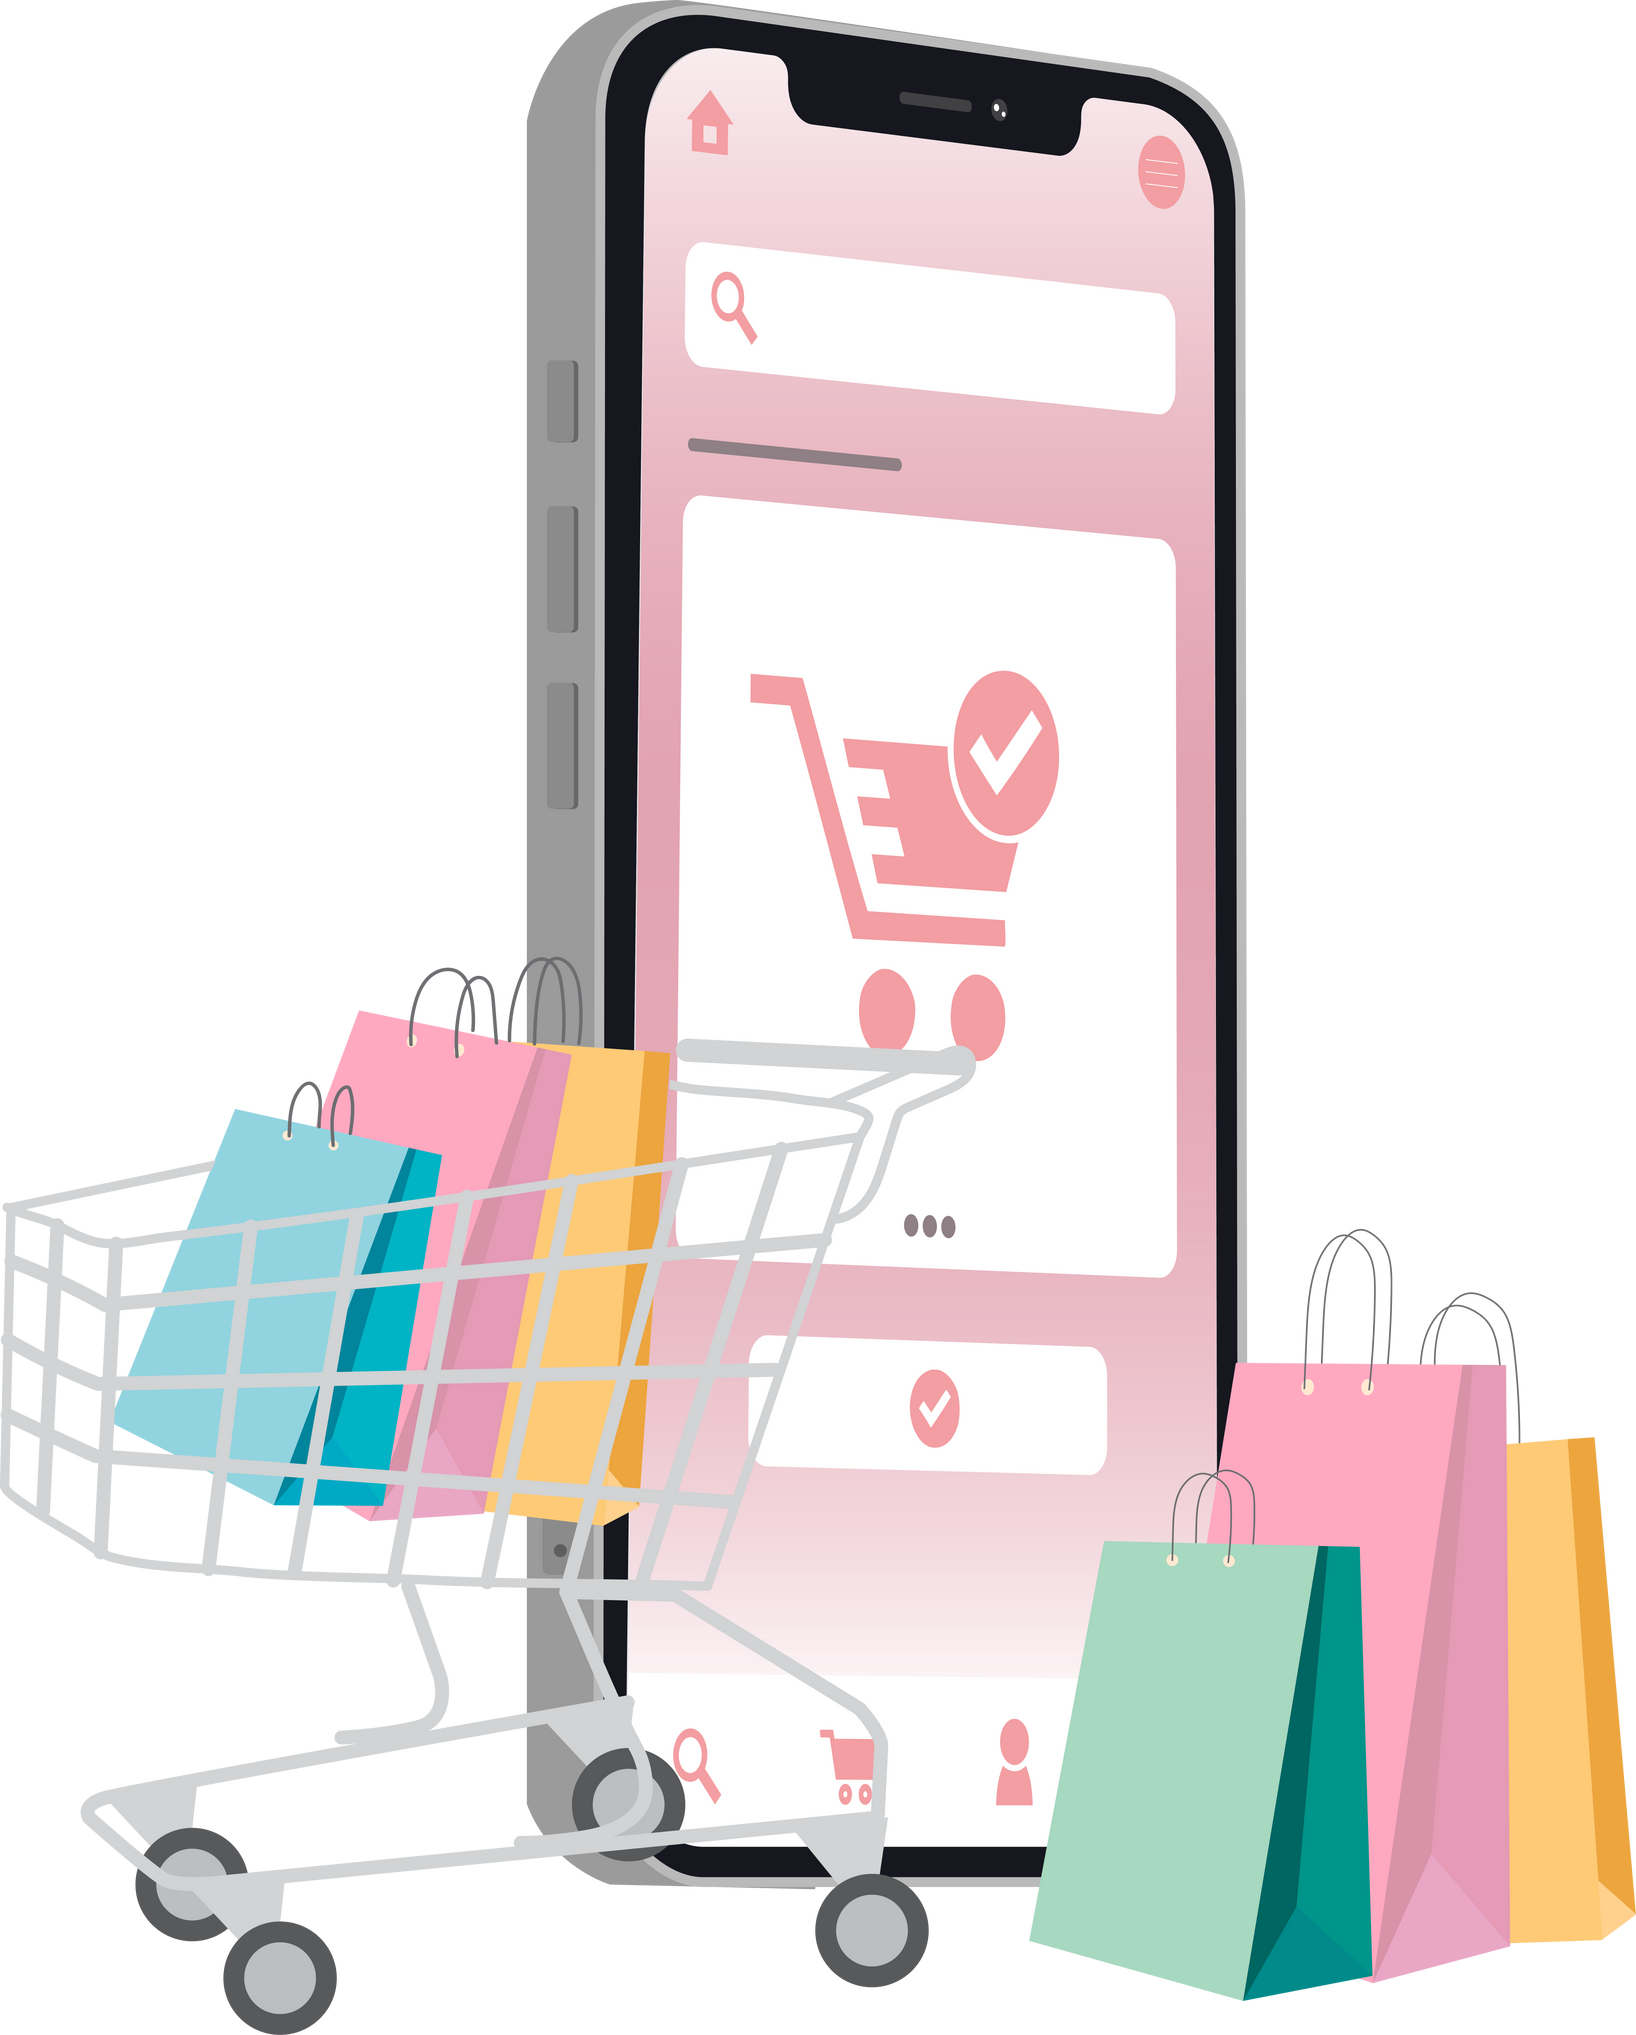 Concept of E-commerce and online shopping.